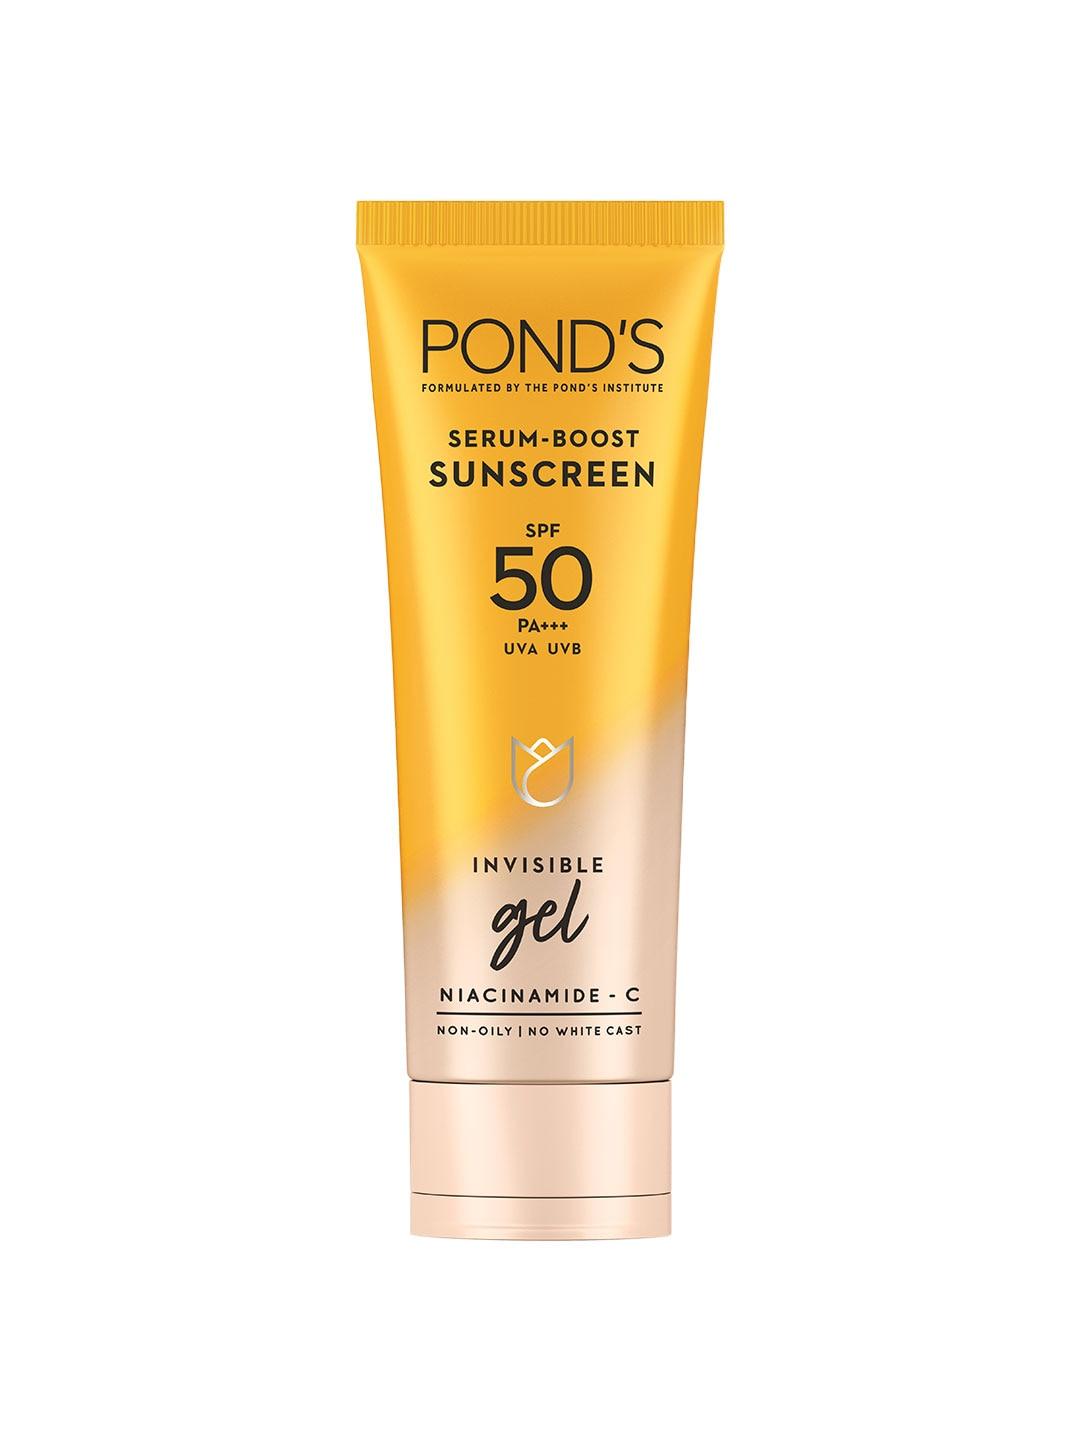 Ponds SPF 50 PA++ UVA UVB Serum Boost Invisible Gel Sunscreen with Niacinamide C - 50 g